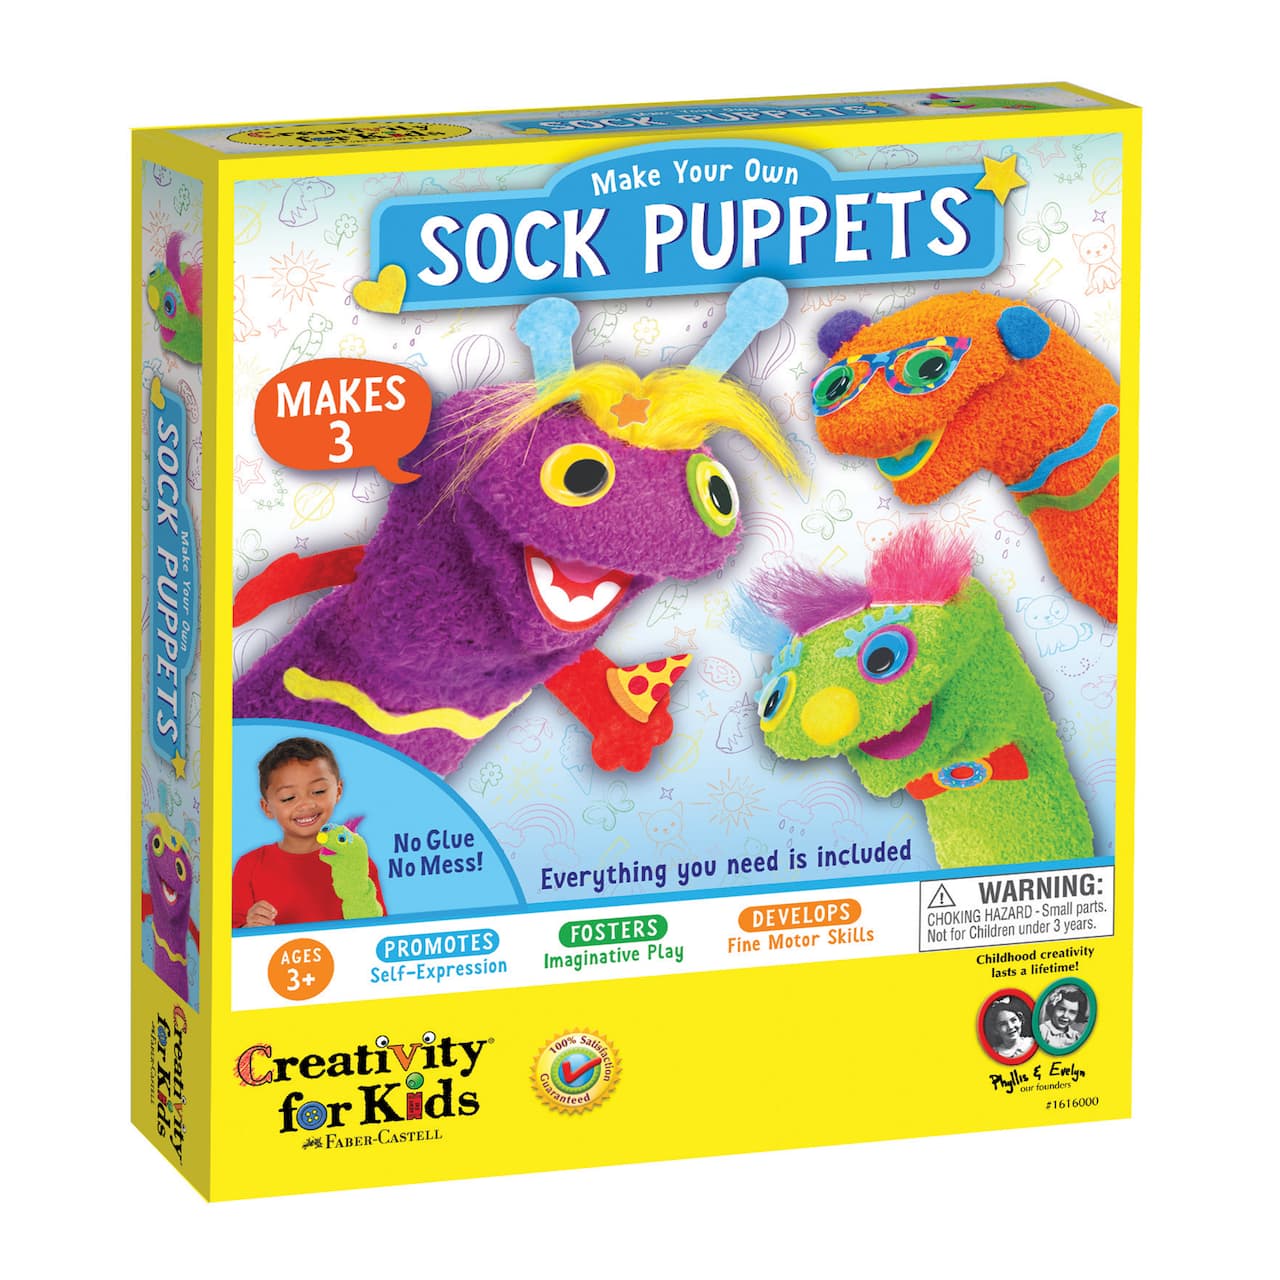 Creativity for Kids Make Your Own Sock Puppets Kit